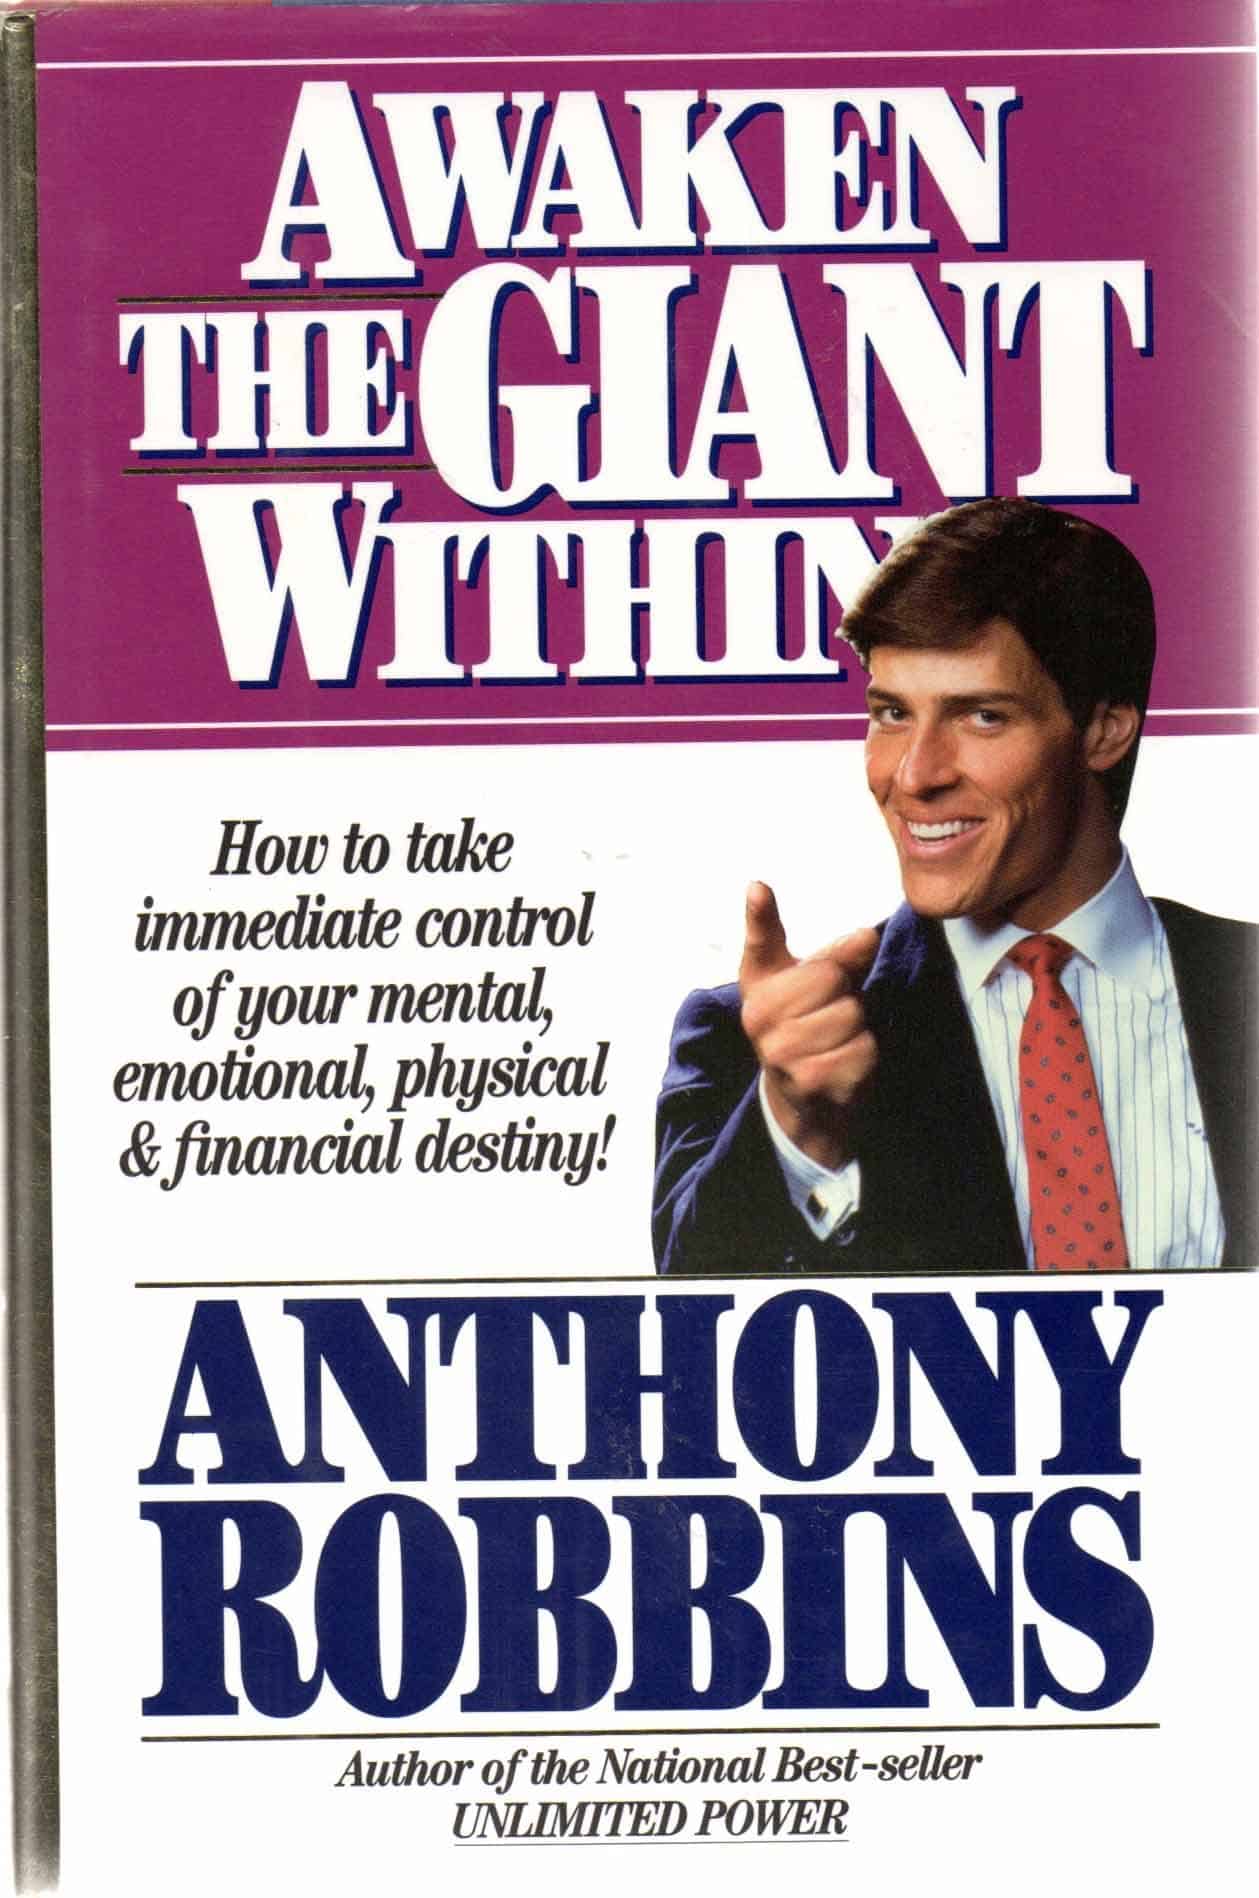 Awaken The Giant Within, by Anthony Robbins - Best Inspirational Book